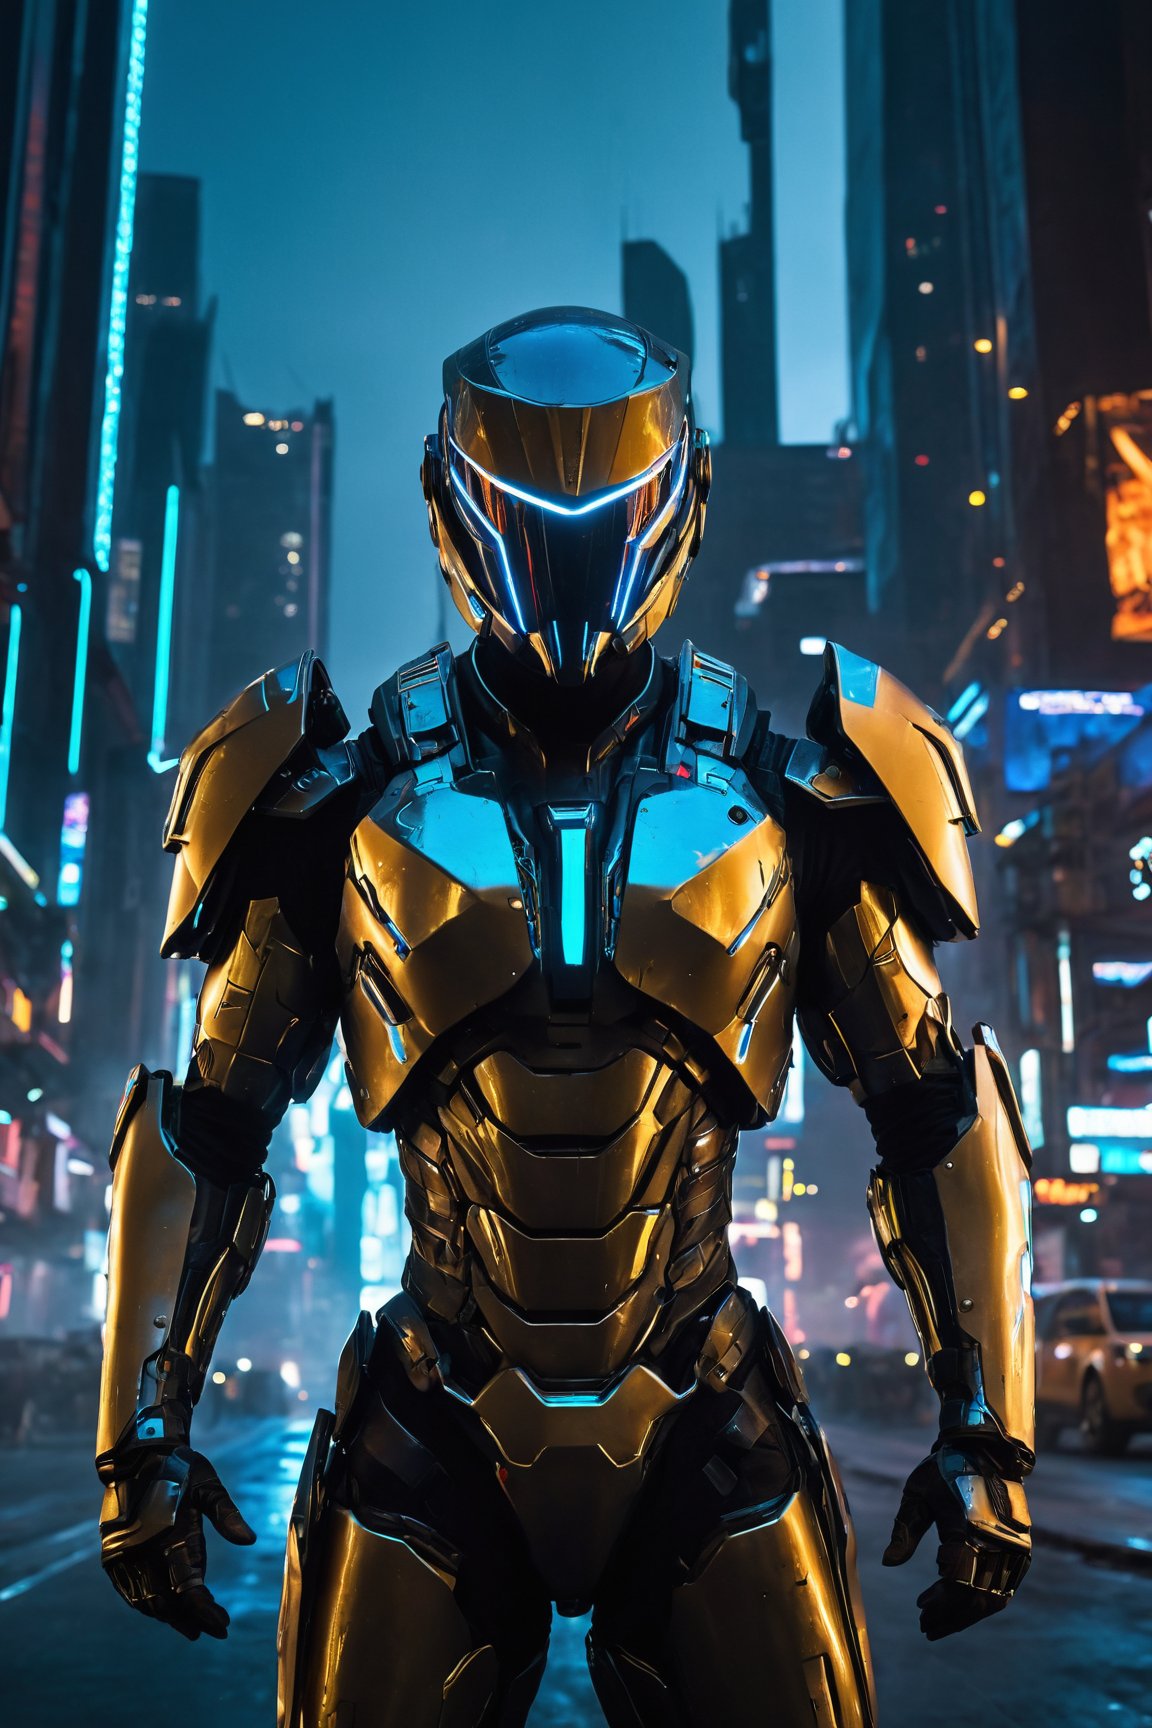 (best quality,4k,8k,highres,masterpiece:1.2),ultra-detailed,(realistic,photorealistic,photo-realistic:1.37), cyberpunk warrior in gold armor, white and blue trim, with a radiant aura and a radiant halo, immersive cybernetic enhancements, sleek and futuristic design, high-tech weaponry, neon-lit dystopian cityscape in the background, hovering drones, dynamic stance and confident expression, glowing LED lights on the armor, glossy metallic finish, monochromatic cyberpunk color scheme, rays of light reflecting off the armor, urban decay and grungy textures, laser beams cutting through the air, futuristic skyscrapers towering above, bustling crowded streets below, cybernetic implants glowing, holographic HUD display, intense glow emanating from the warrior's palms, sparks of electricity crackling around, rain-soaked streets reflecting the vibrant neon lights, heavy smoke and steam filling the air, atmospheric fog creating a mysterious ambiance, high-speed hoverbike trailing behind with streaks of light, electrifying energy surging through the armor, intense battle action, dynamic motion blur effects, dystopian and futuristic atmosphere, cybernetic combat suit powered by advanced technology, towering billboards displaying holographic advertisements, futuristic visor enhancing the warrior's vision, high-contrast lighting, shadows dancing across the warrior's face, intense cyberpunk energy pulsating in the air.